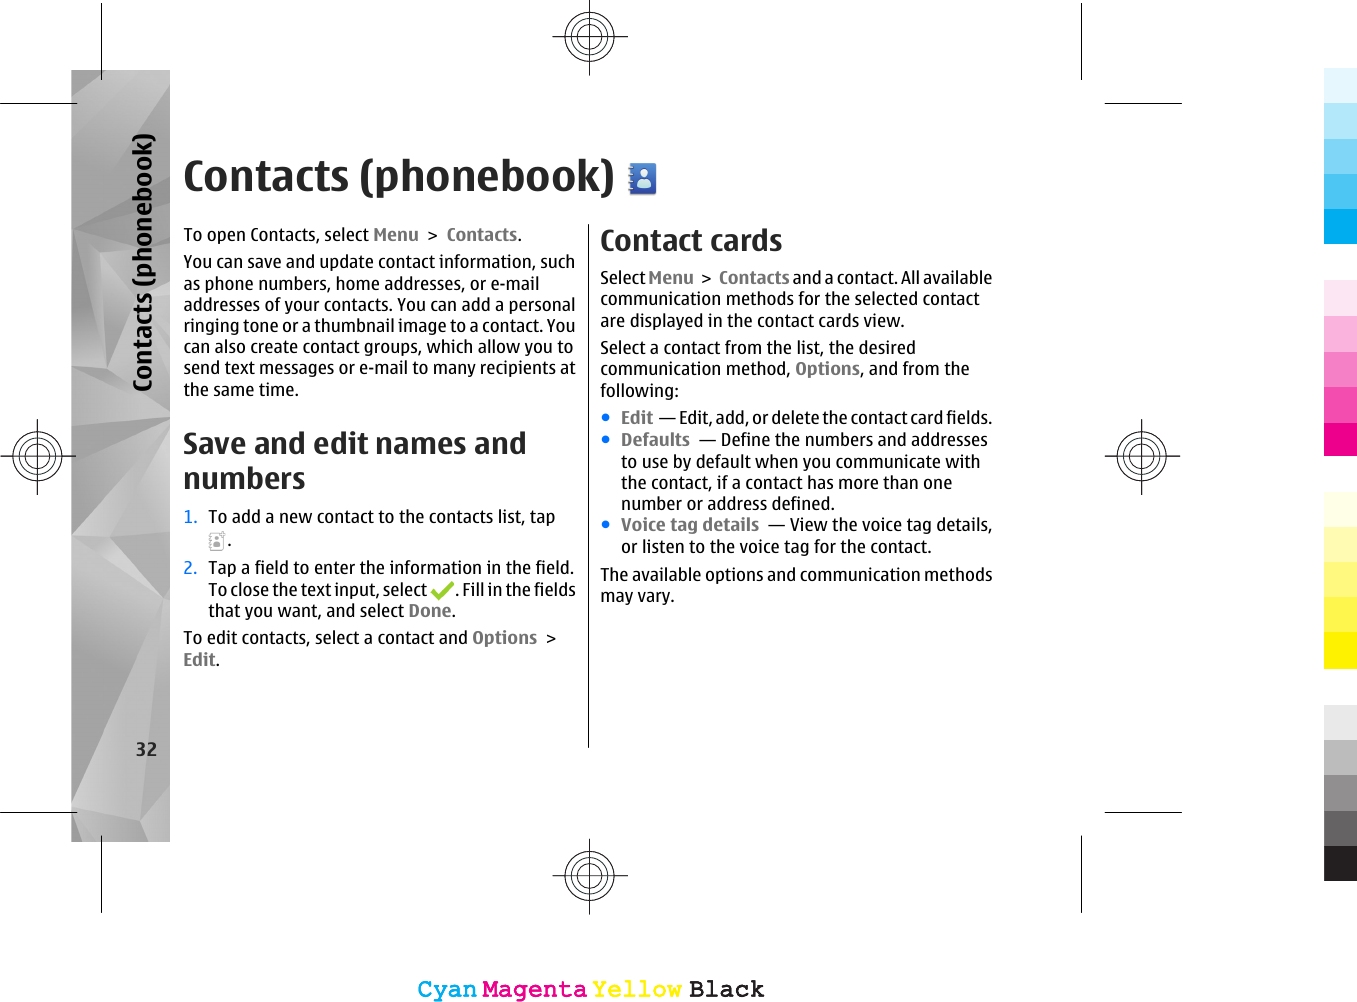 Contacts (phonebook)To open Contacts, select Menu &gt; Contacts.You can save and update contact information, suchas phone numbers, home addresses, or e-mailaddresses of your contacts. You can add a personalringing tone or a thumbnail image to a contact. Youcan also create contact groups, which allow you tosend text messages or e-mail to many recipients atthe same time.Save and edit names andnumbers1. To add a new contact to the contacts list, tap.2. Tap a field to enter the information in the field.To close the text input, select  . Fill in the fieldsthat you want, and select Done.To edit contacts, select a contact and Options &gt;Edit.Contact cardsSelect Menu &gt; Contacts and a contact. All availablecommunication methods for the selected contactare displayed in the contact cards view.Select a contact from the list, the desiredcommunication method, Options, and from thefollowing:●Edit  — Edit, add, or delete the contact card fields.●Defaults  — Define the numbers and addressesto use by default when you communicate withthe contact, if a contact has more than onenumber or address defined.●Voice tag details  — View the voice tag details,or listen to the voice tag for the contact.The available options and communication methodsmay vary.32Contacts (phonebook)CyanCyanMagentaMagentaYellowYellowBlackBlackCyanCyanMagentaMagentaYellowYellowBlackBlack